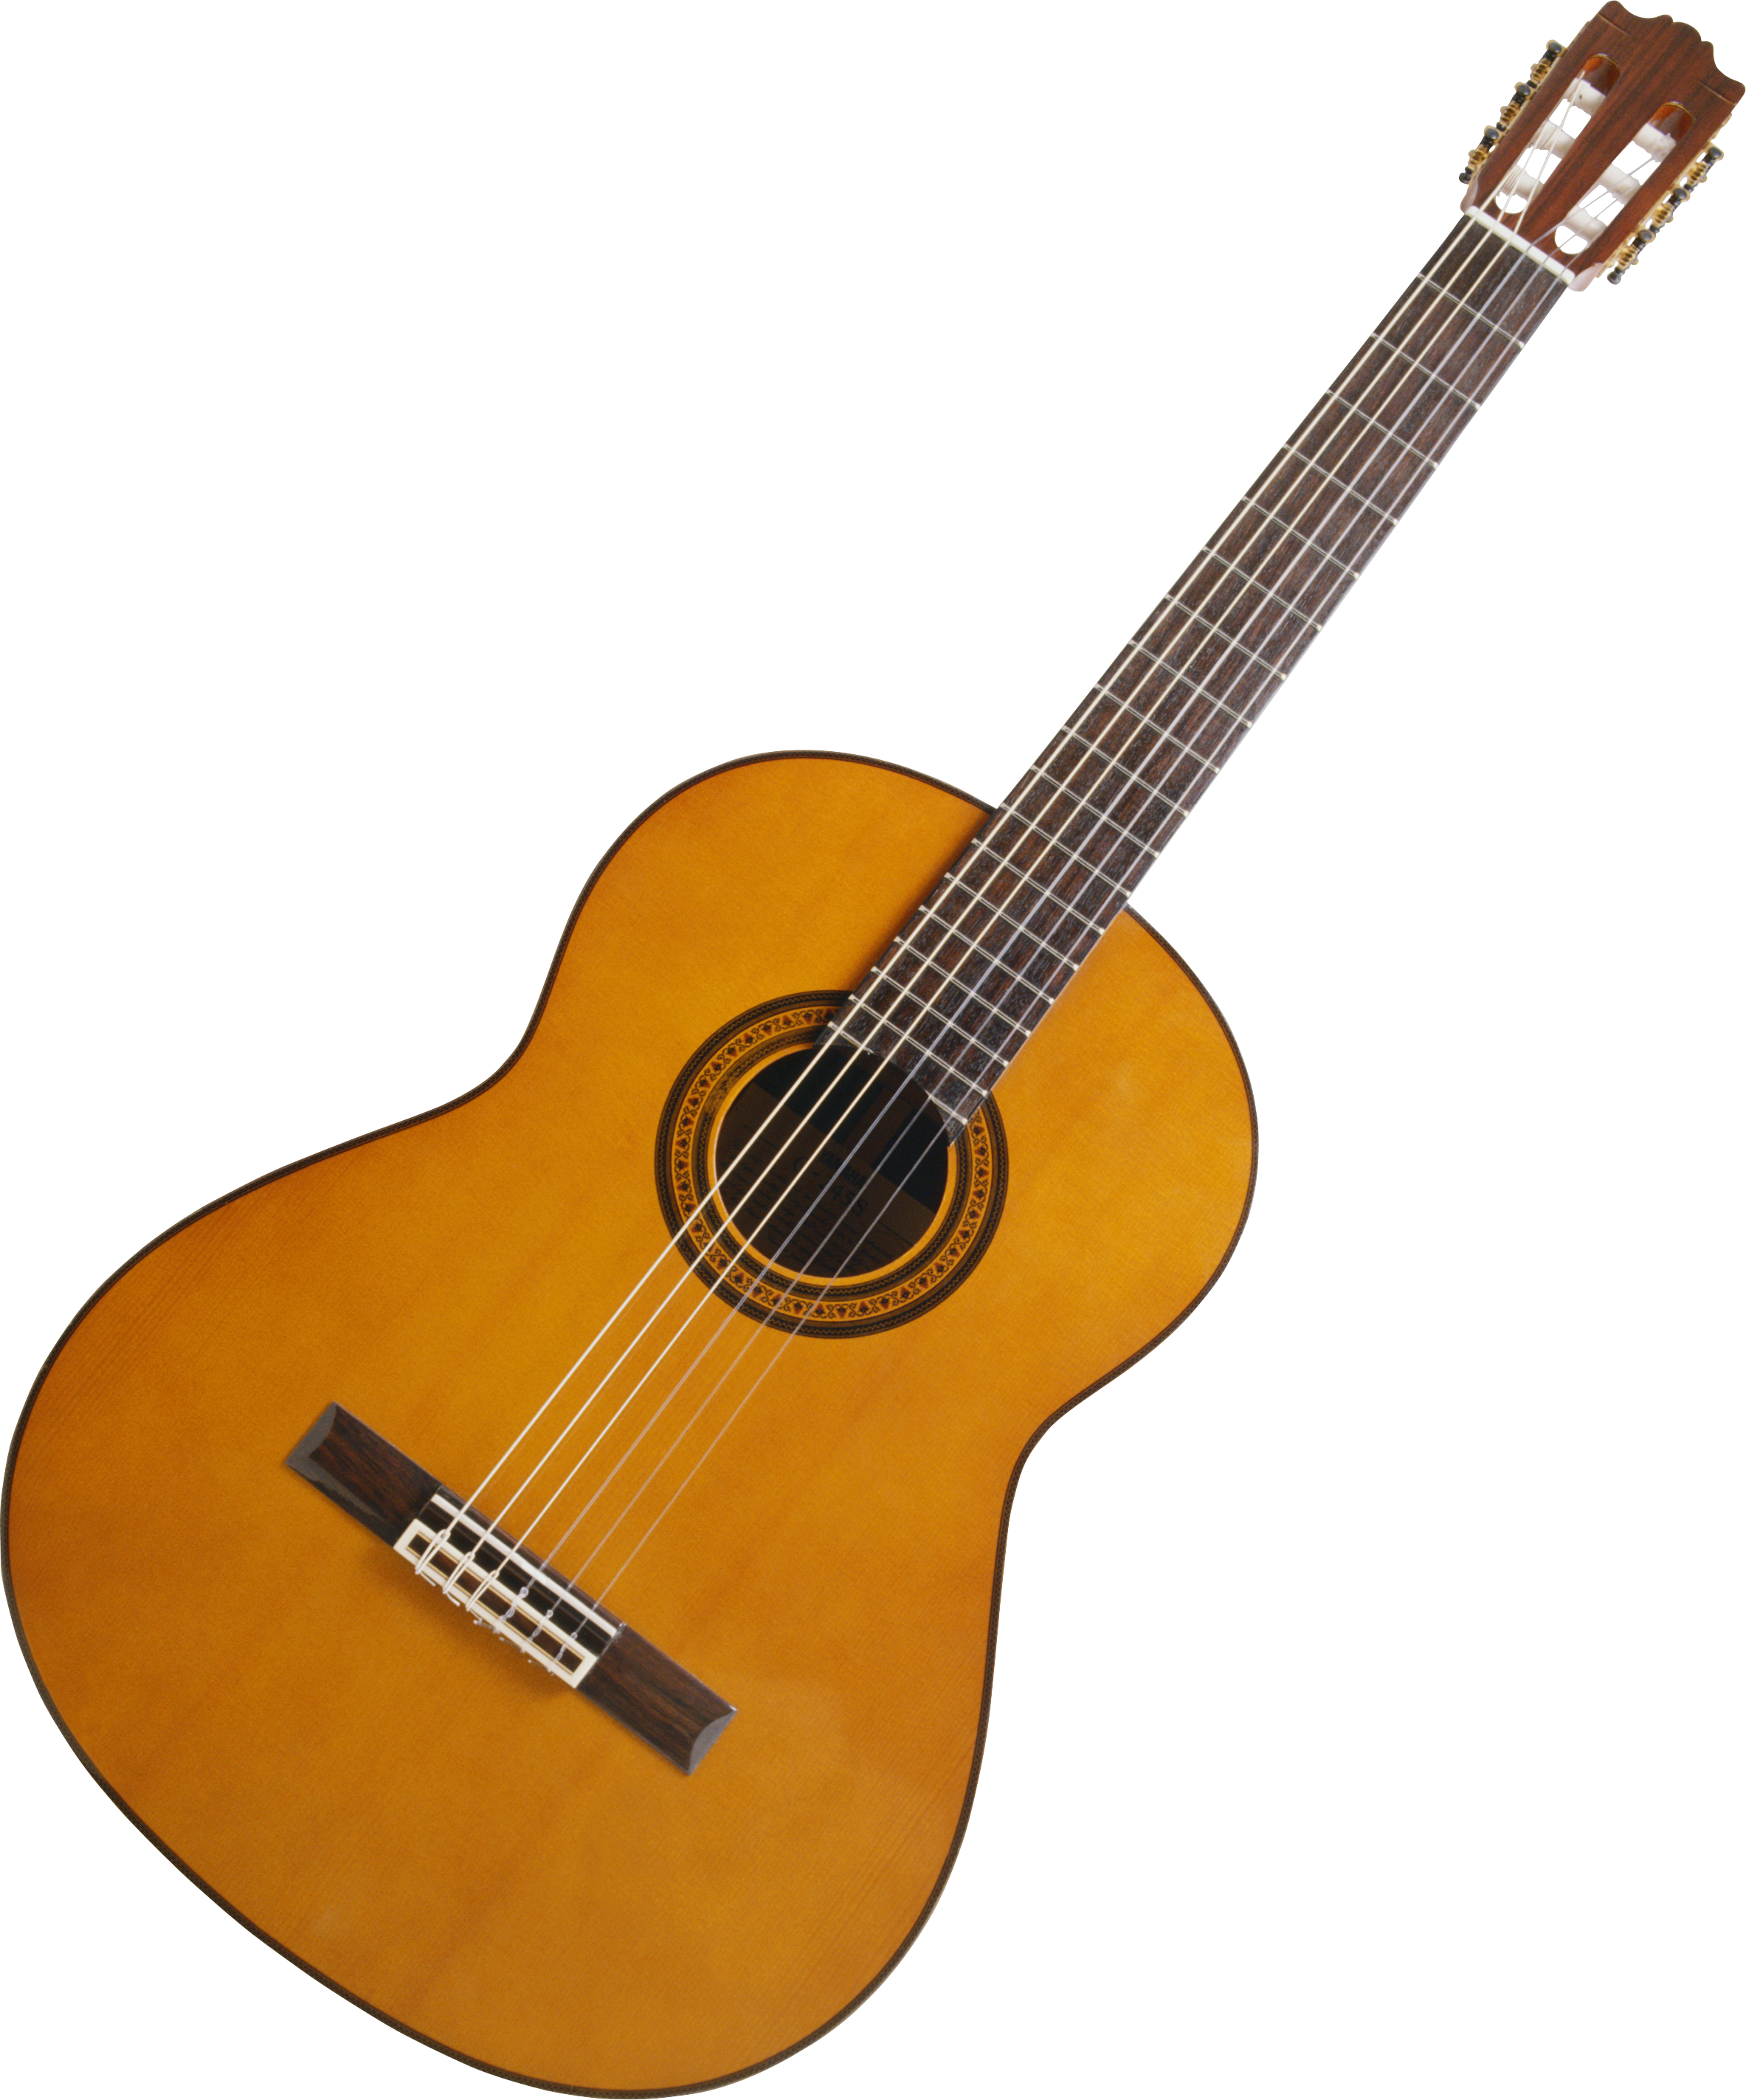 Guitar png images free. Festival clipart instrument